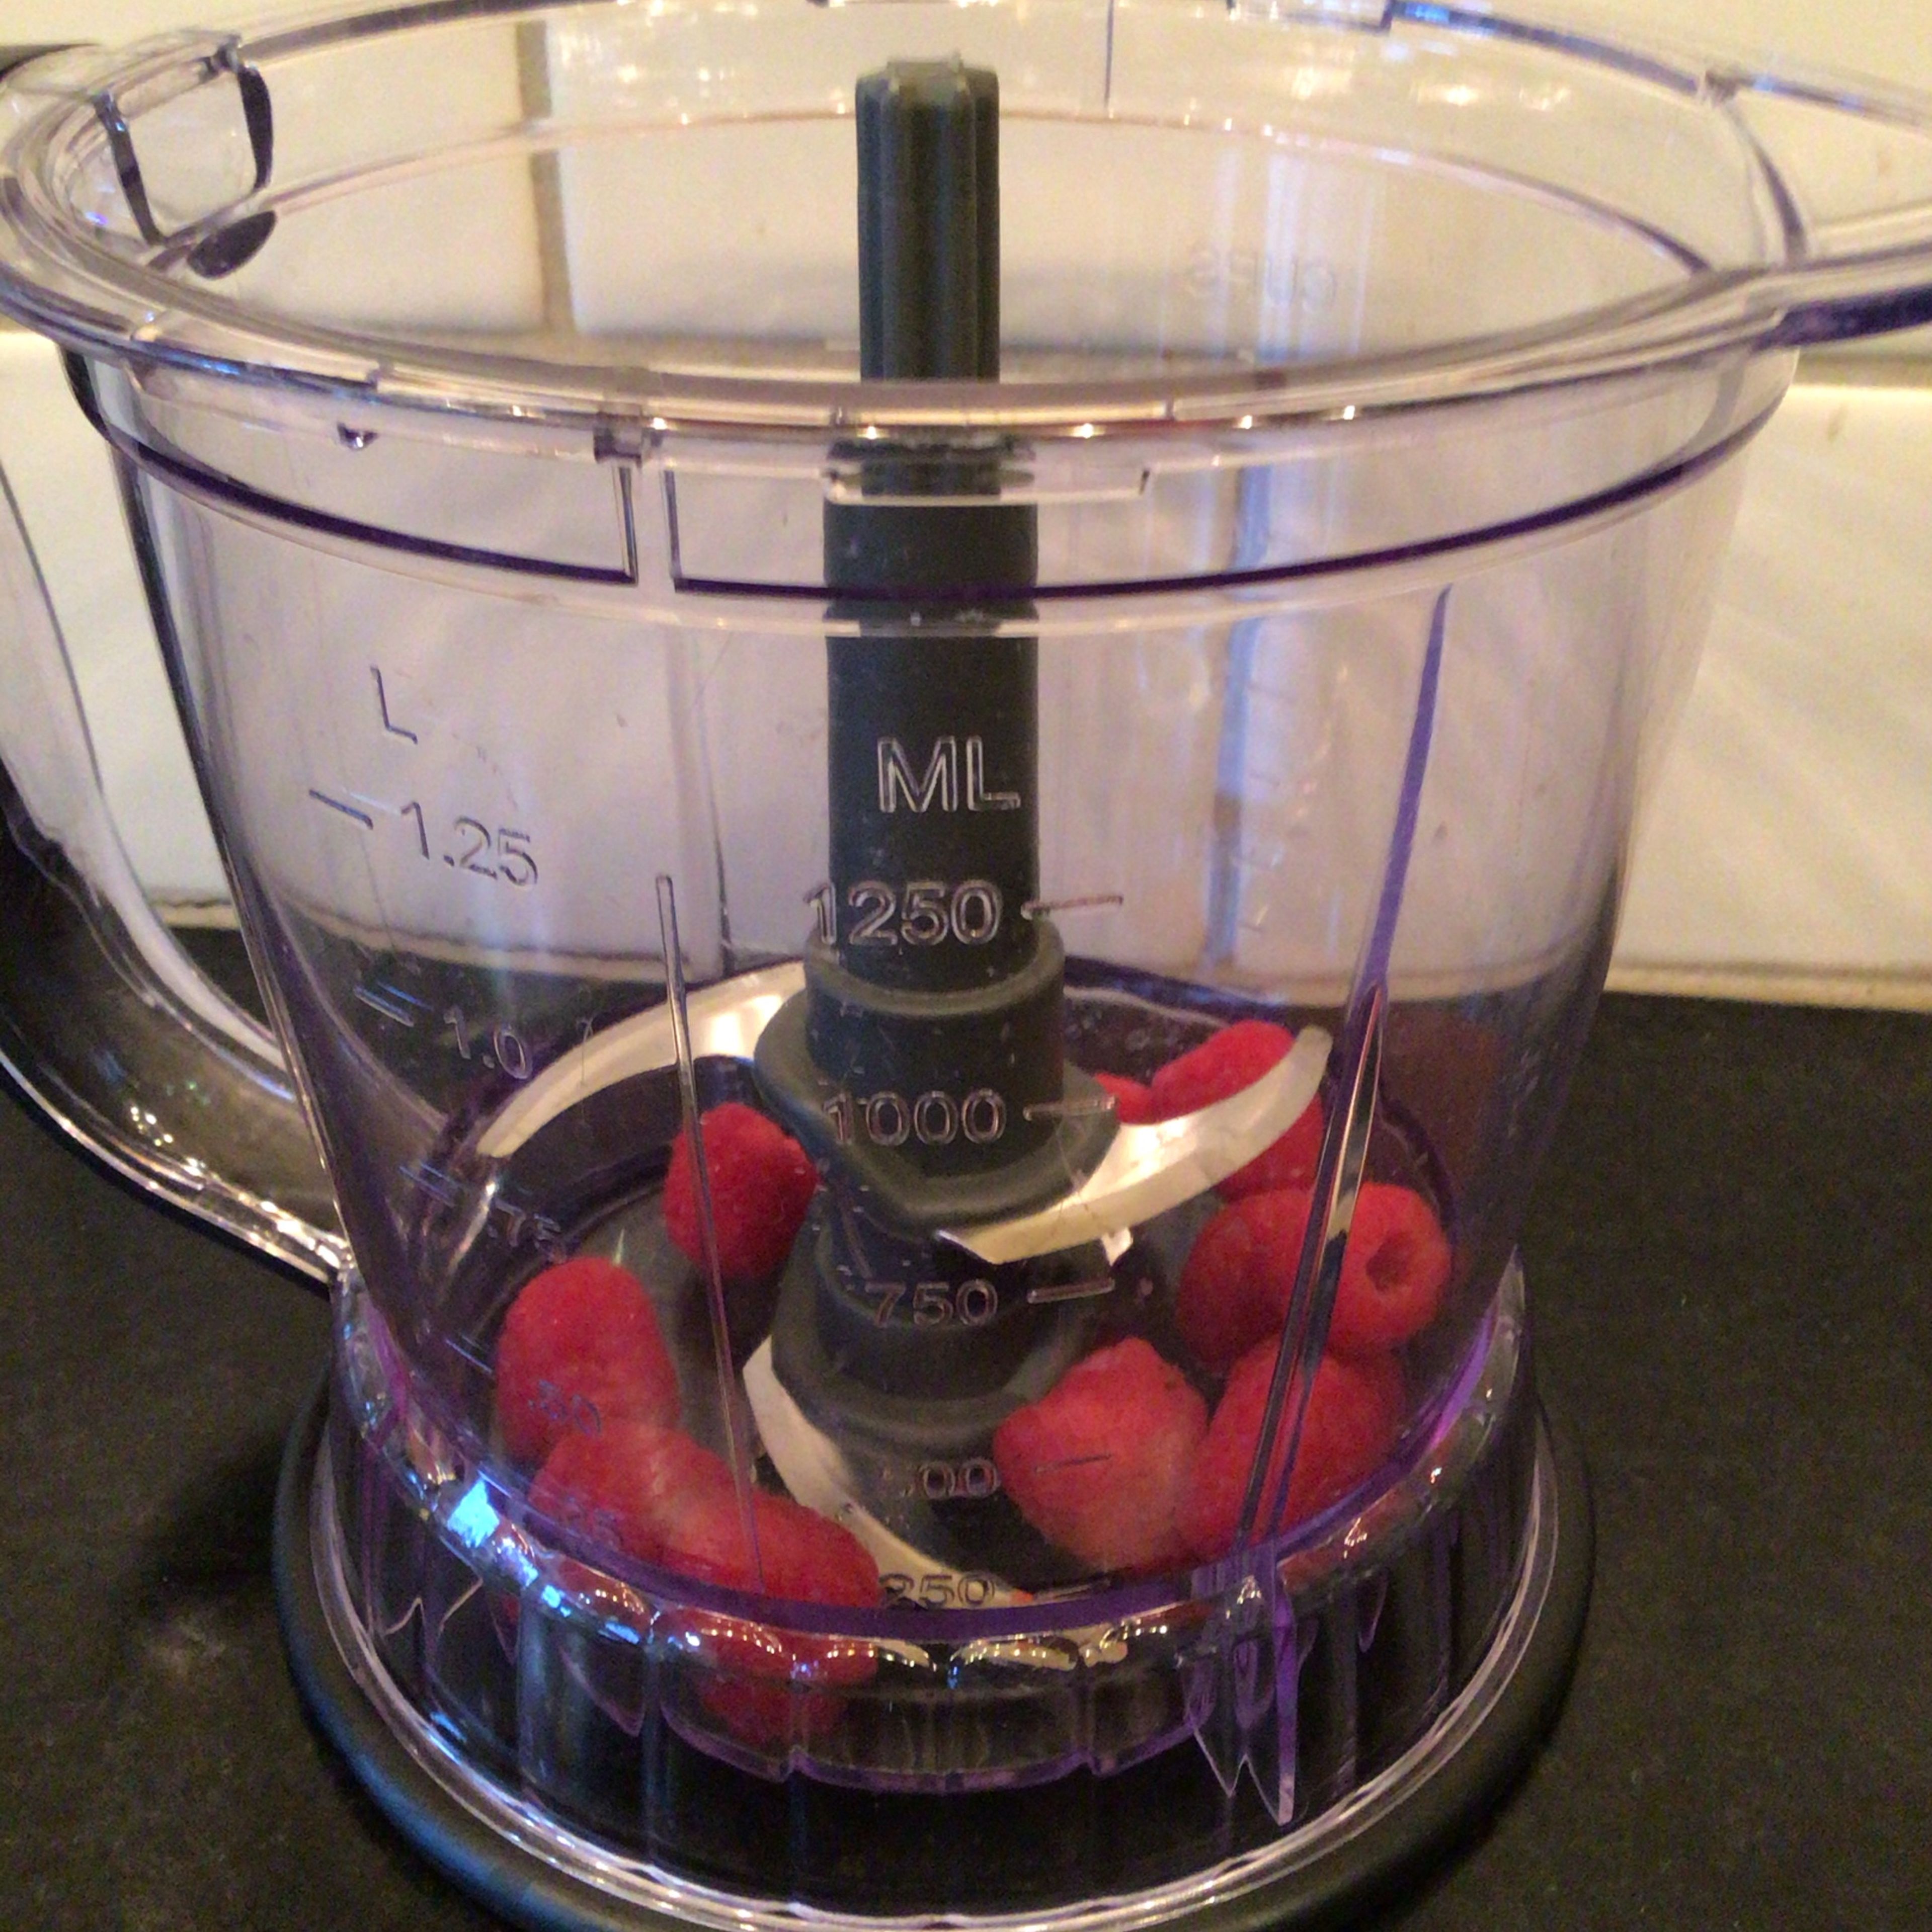 Add Raspberries Into your Blender